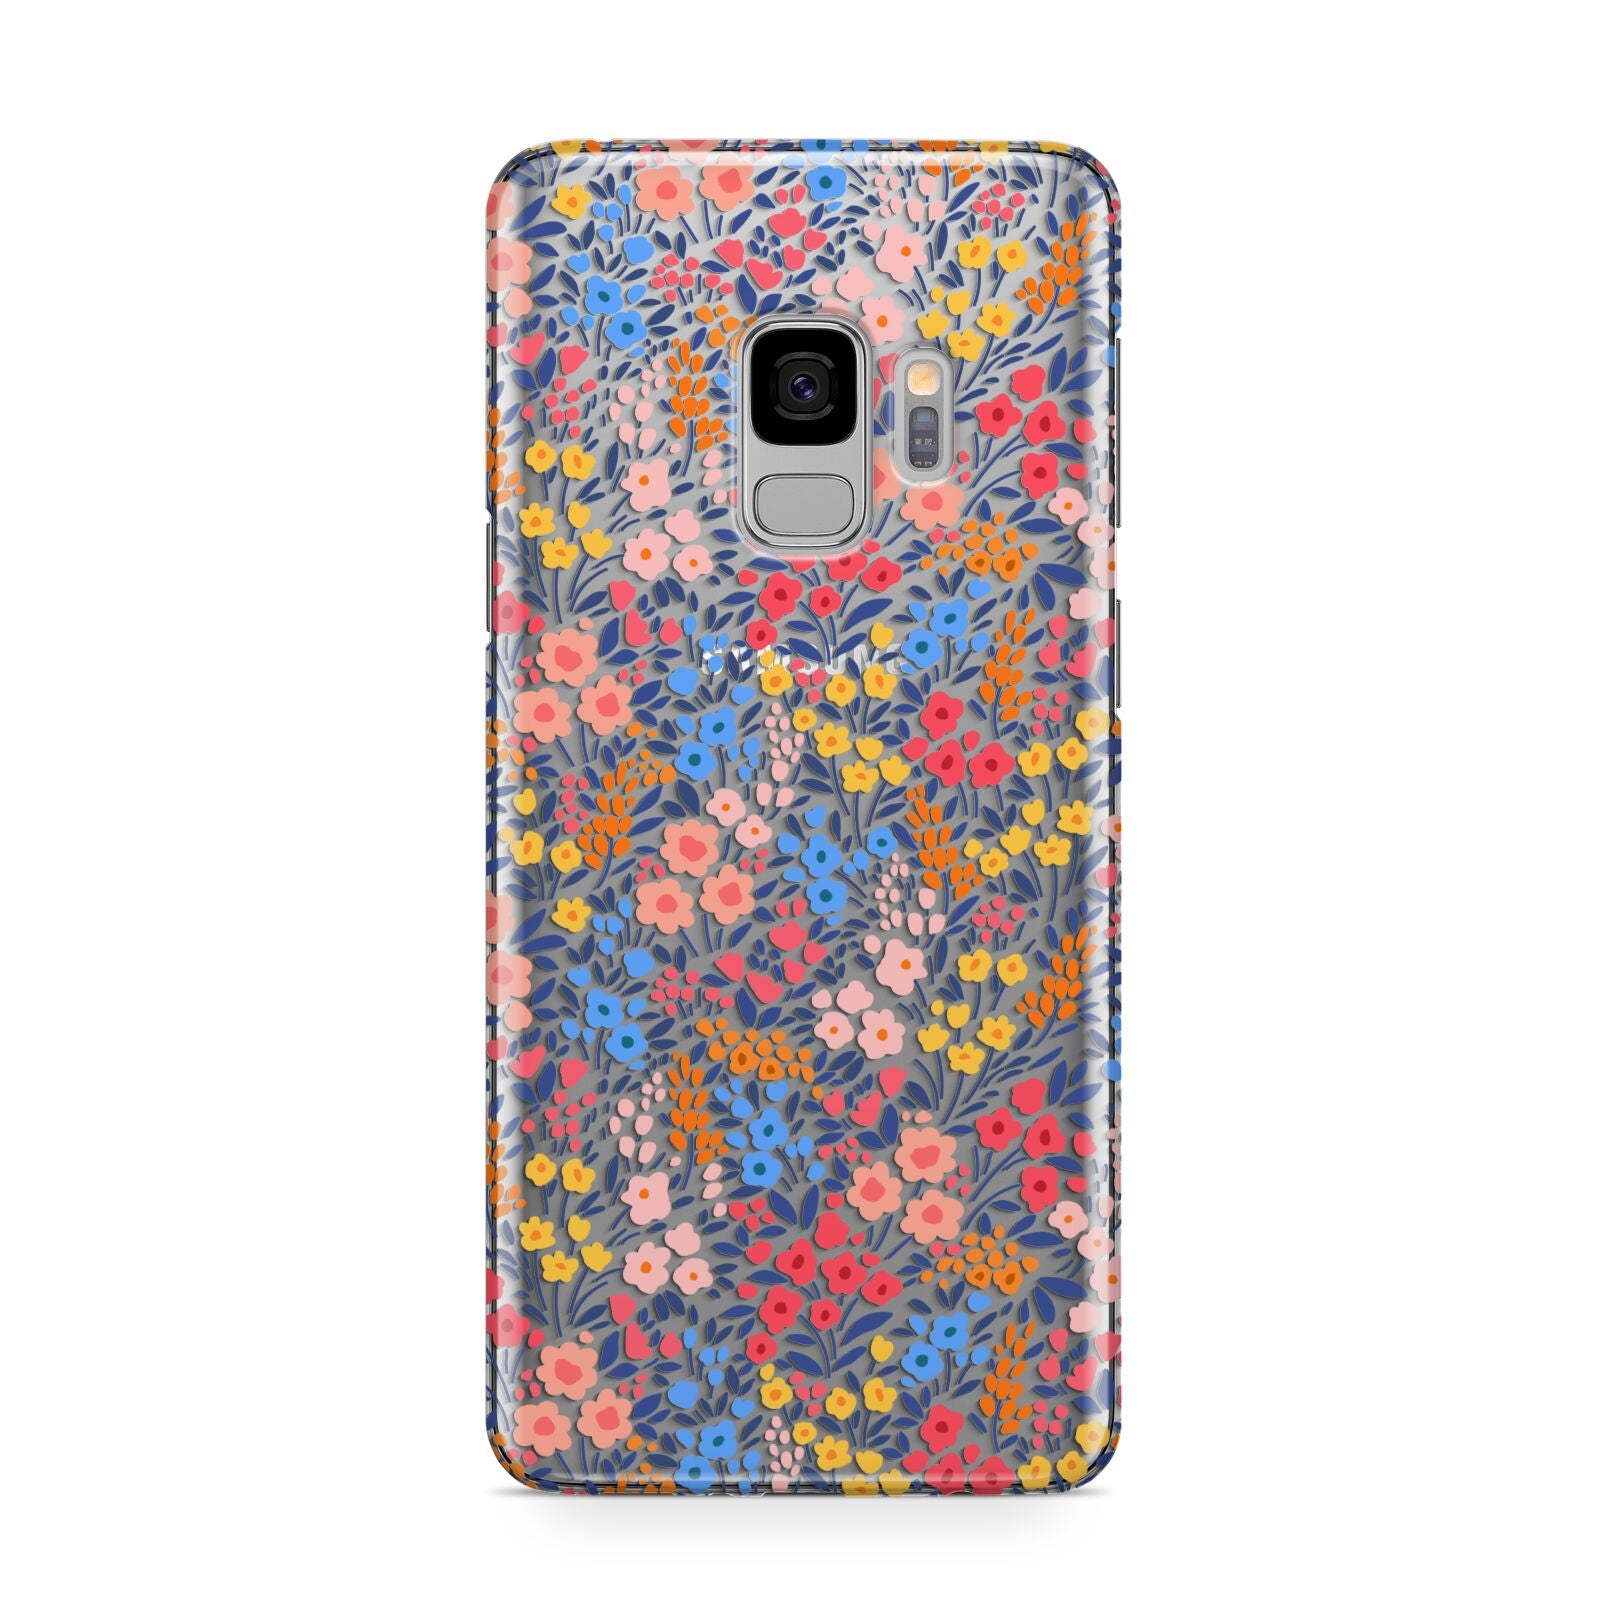 Small Flowers Samsung Galaxy S9 Case